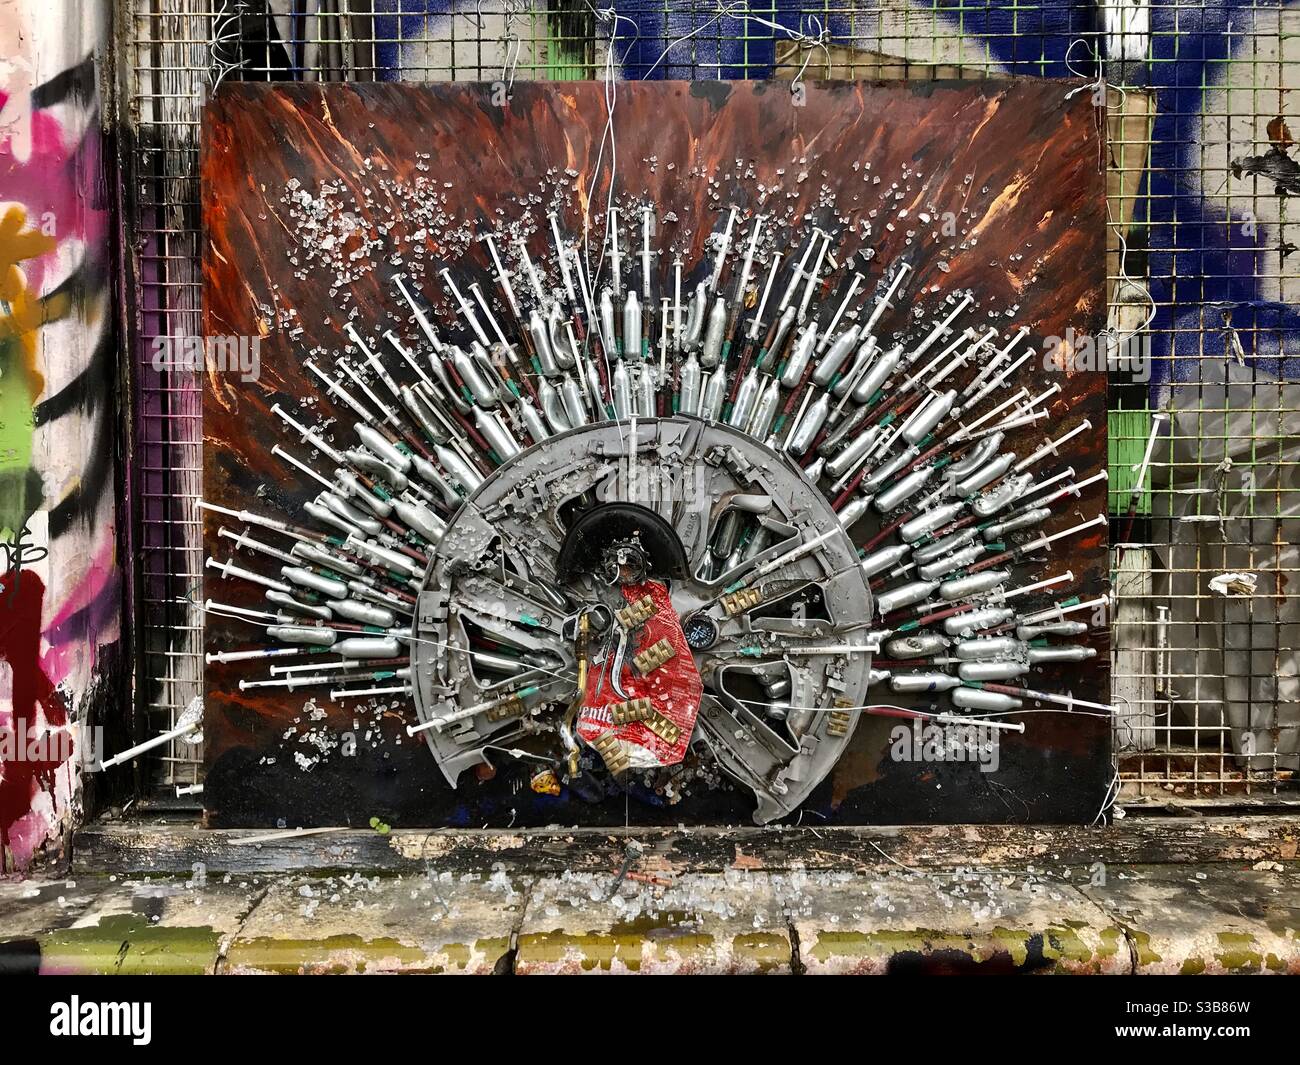 An amazing metal fan tailed sculpture on a wall in Homerton, east end of London,UK Stock Photo